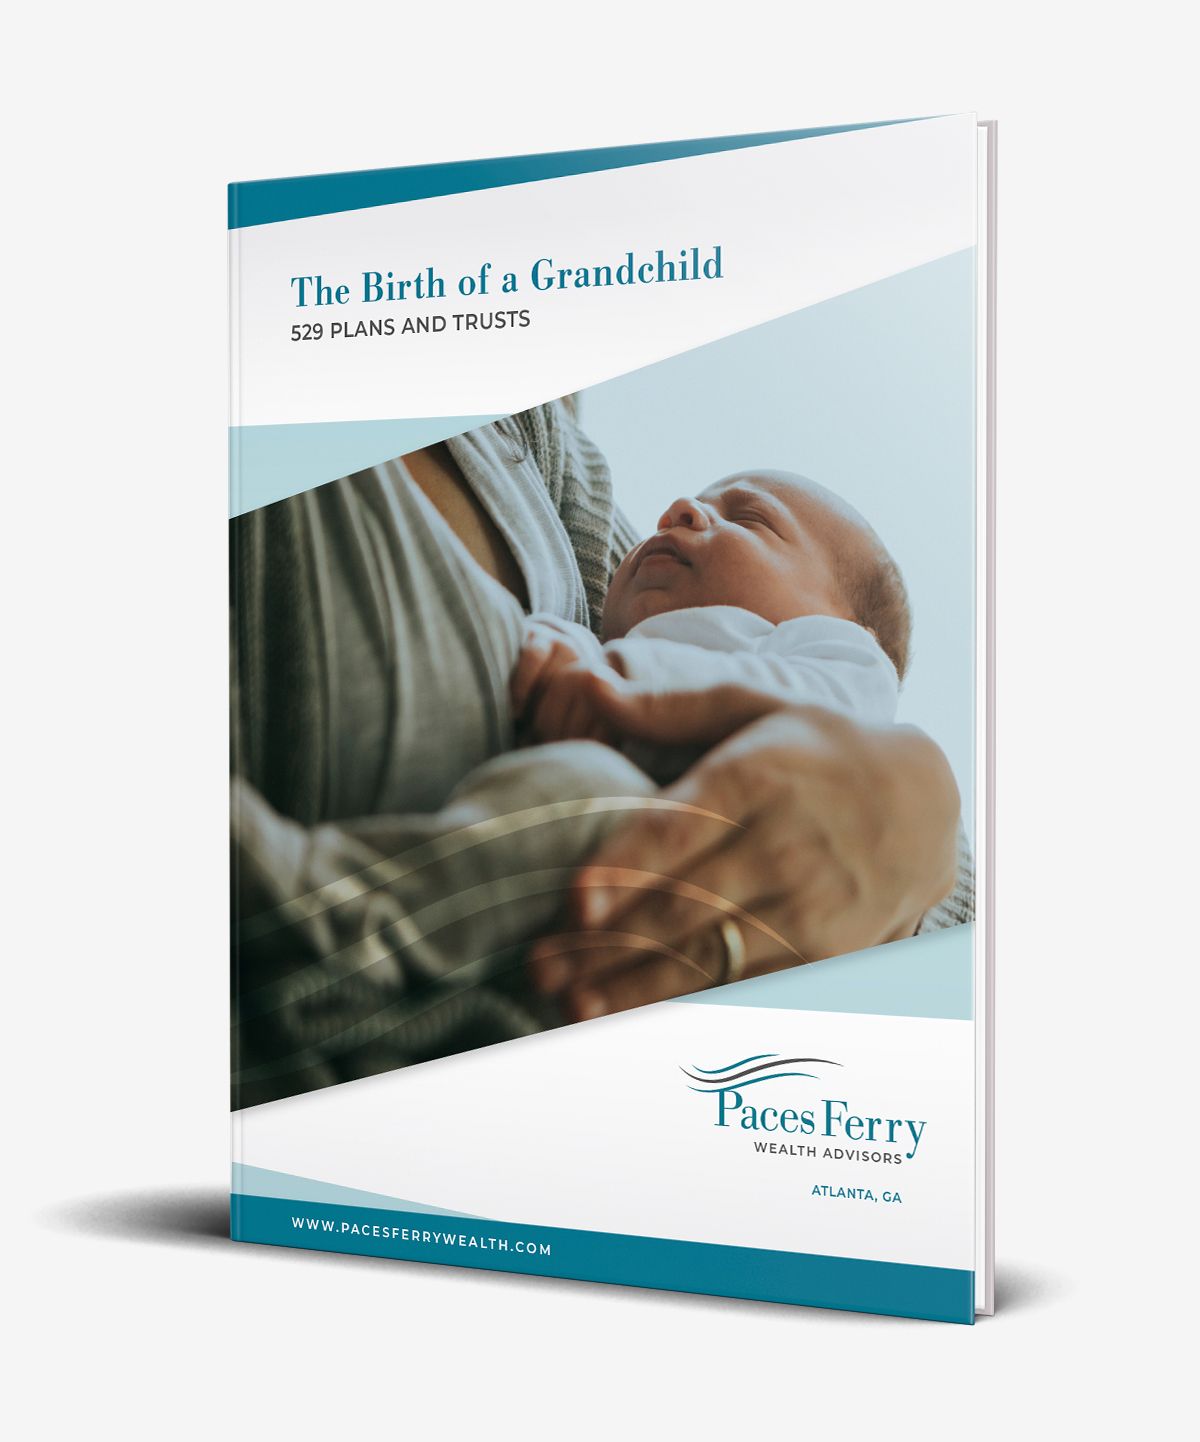 financial planning whitepaper: the birth of a grandchild